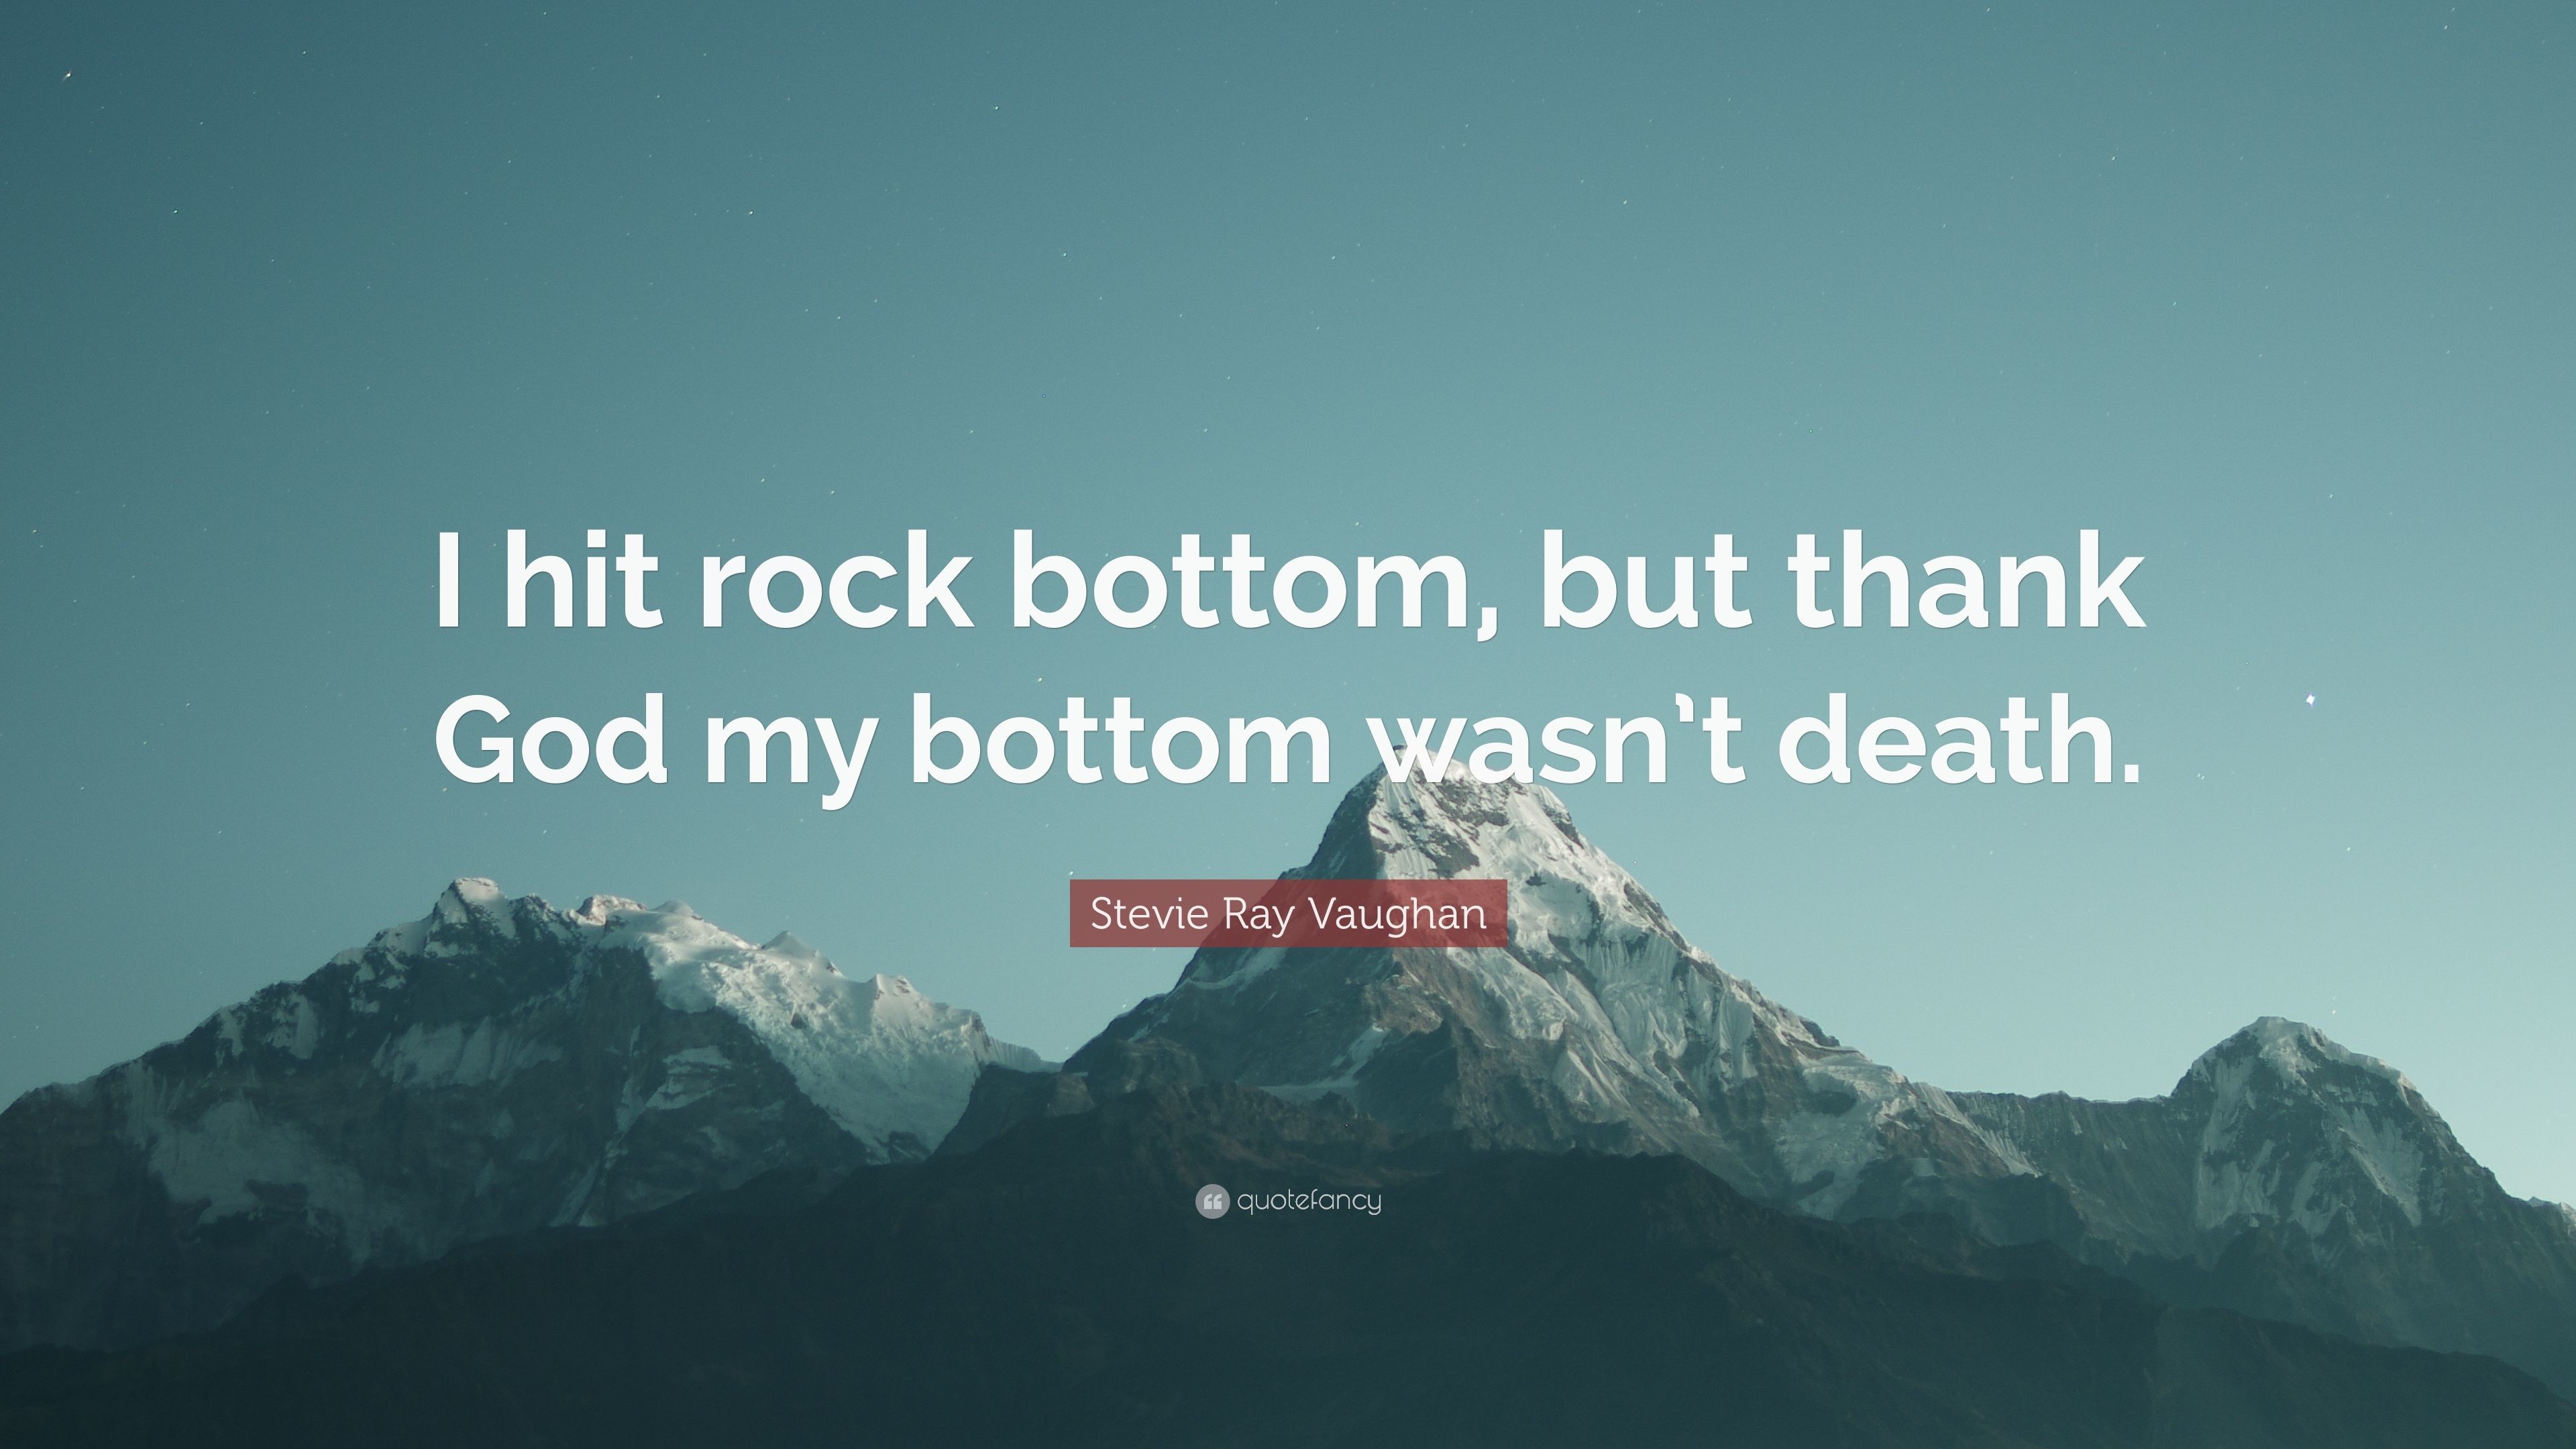 3840x2160 Stevie Ray Vaughan Quote: “I hit rock bottom, but thank God my bottom